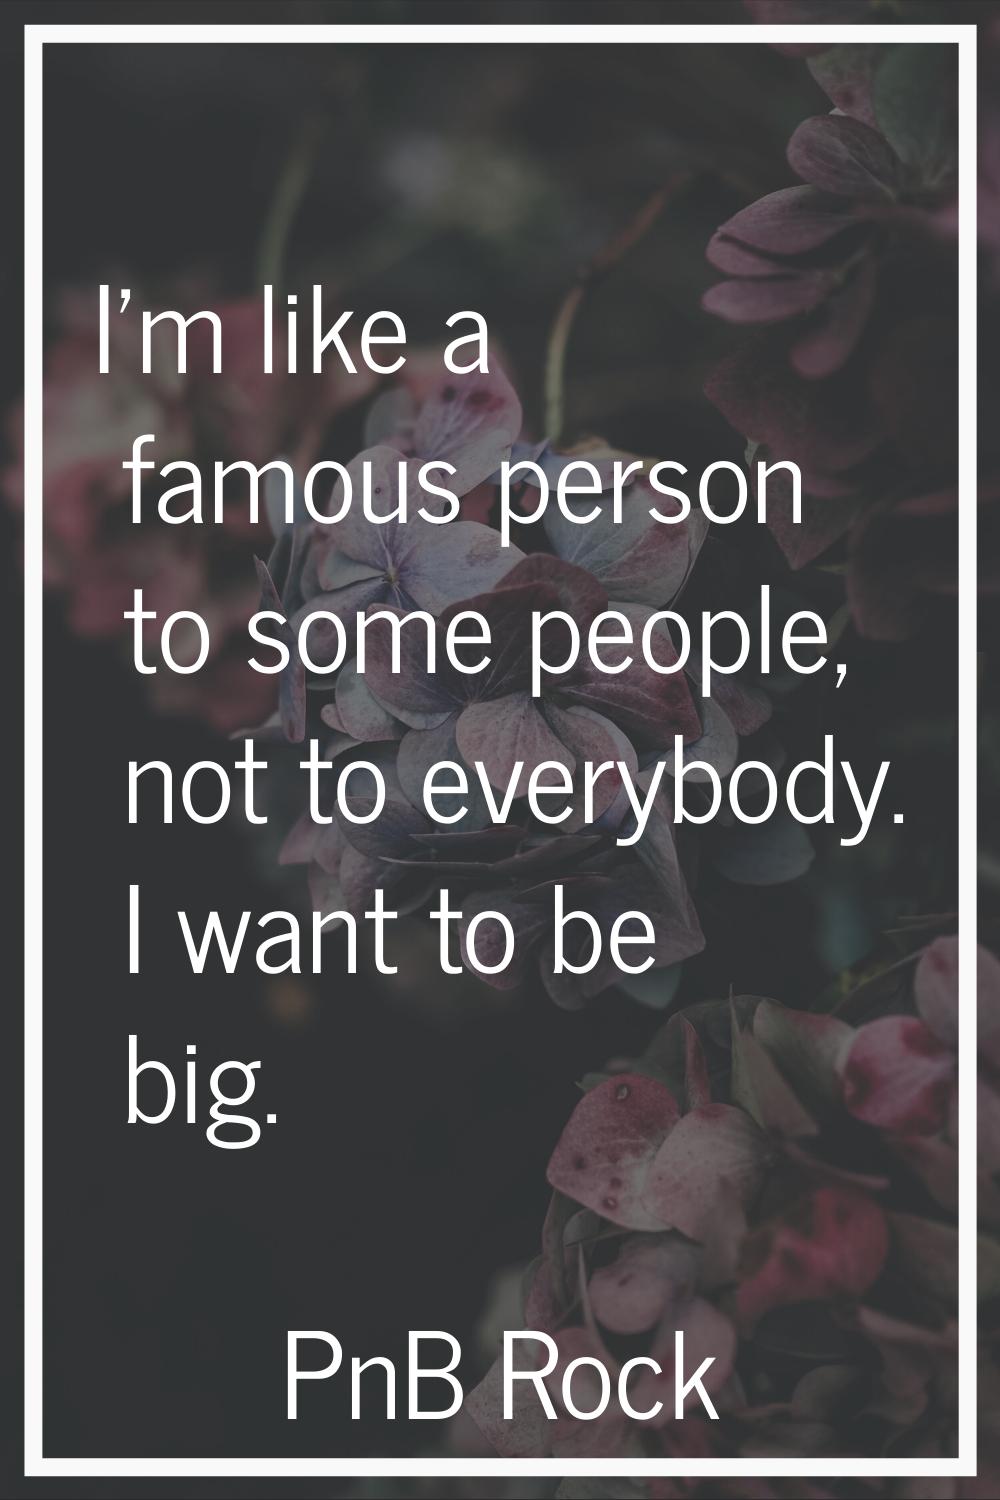 I'm like a famous person to some people, not to everybody. I want to be big.